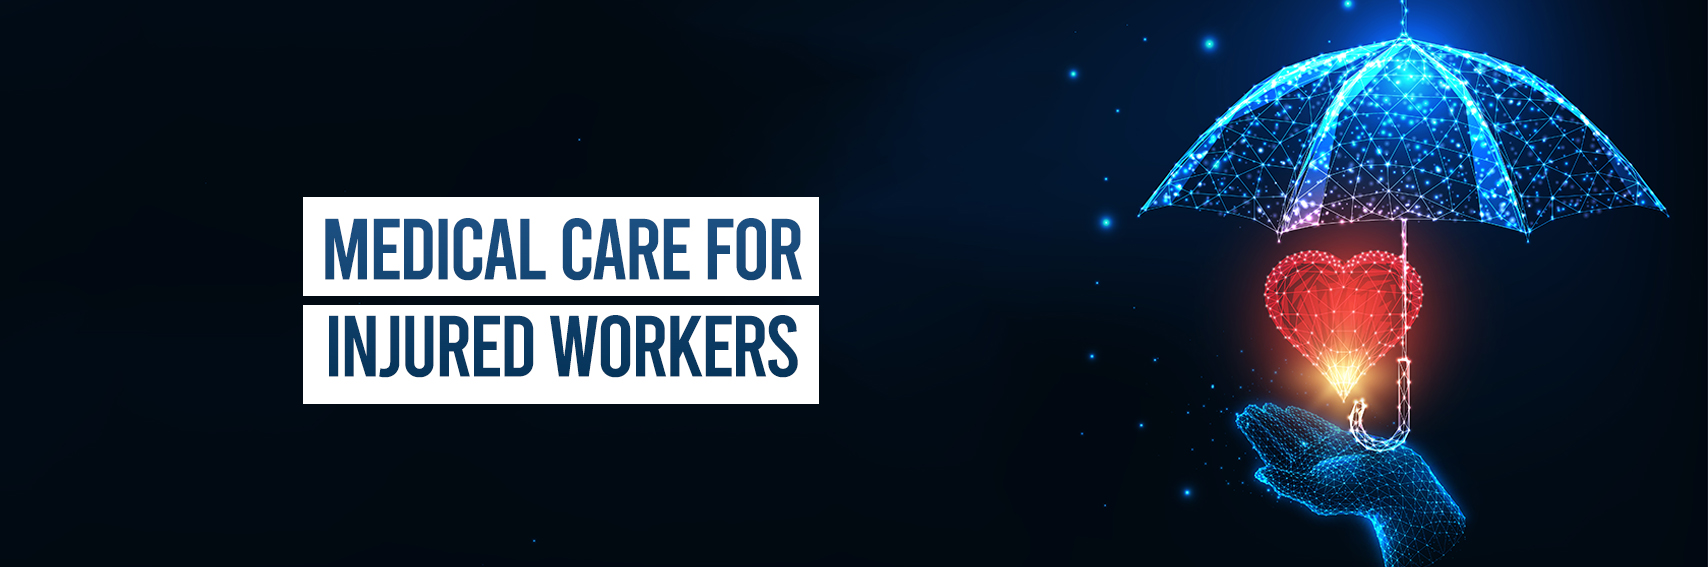 Do UR and IMR restrict medical care for Injured Workers?